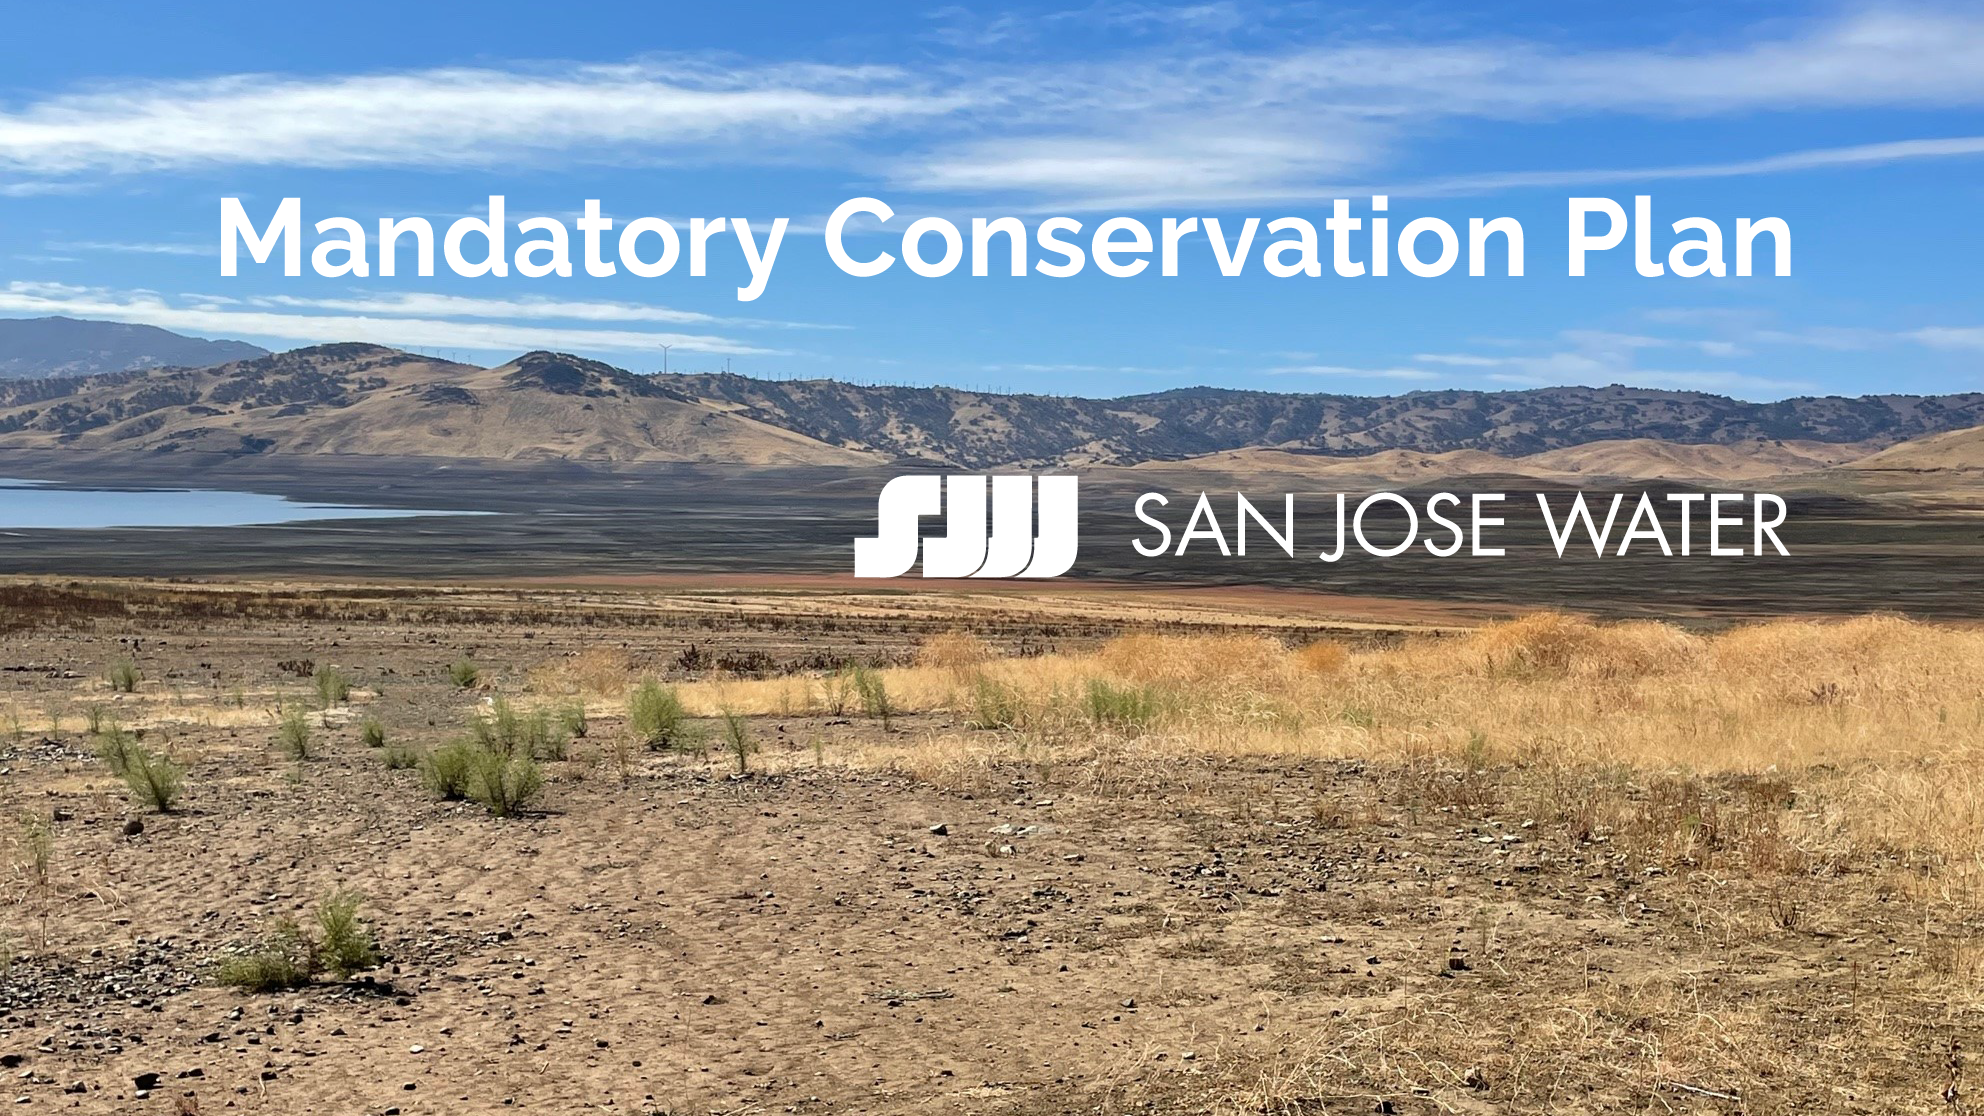 Photo of dried up San Luis reservoir with title: Mandatory Conservation Plan